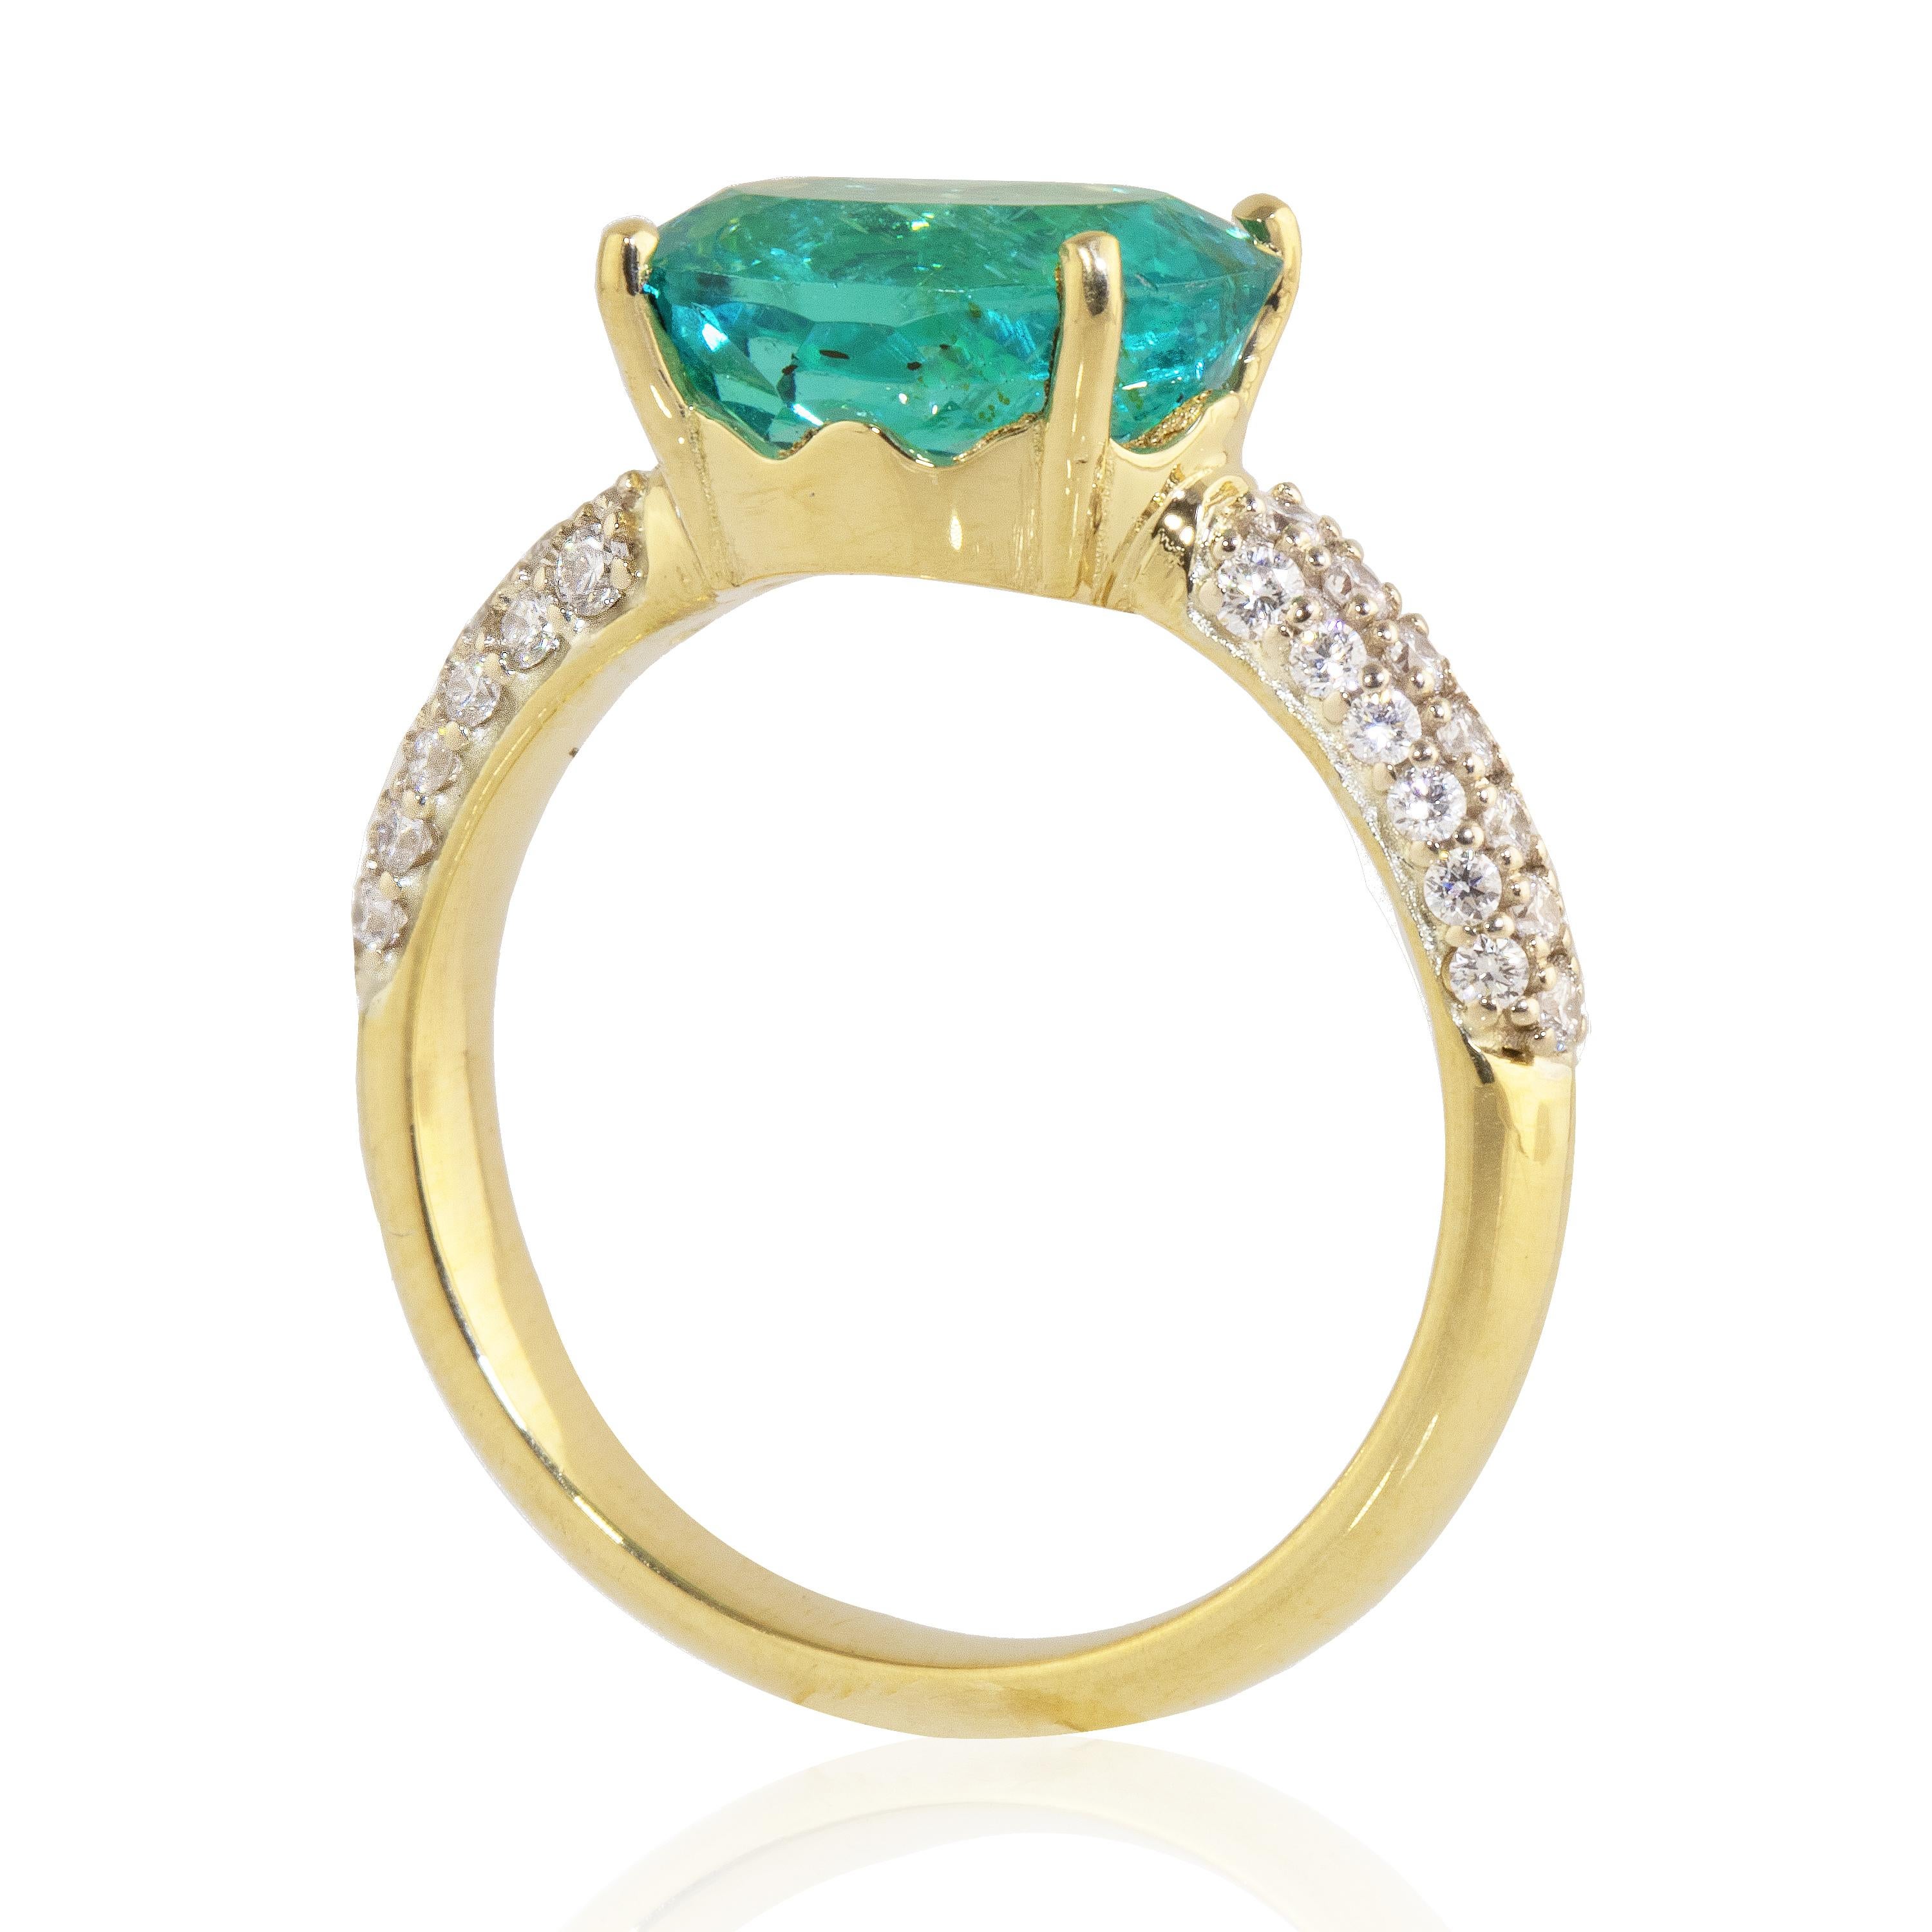 Featuring a super bright, Apatite center stone atop a wave bezel with pave diamonds (.31 carats) along the band.  This ring was inspired by the colors of the deep  ocean waves.  Featuring a 2.95 carat bright Apatite at the center.  

Apatite is a